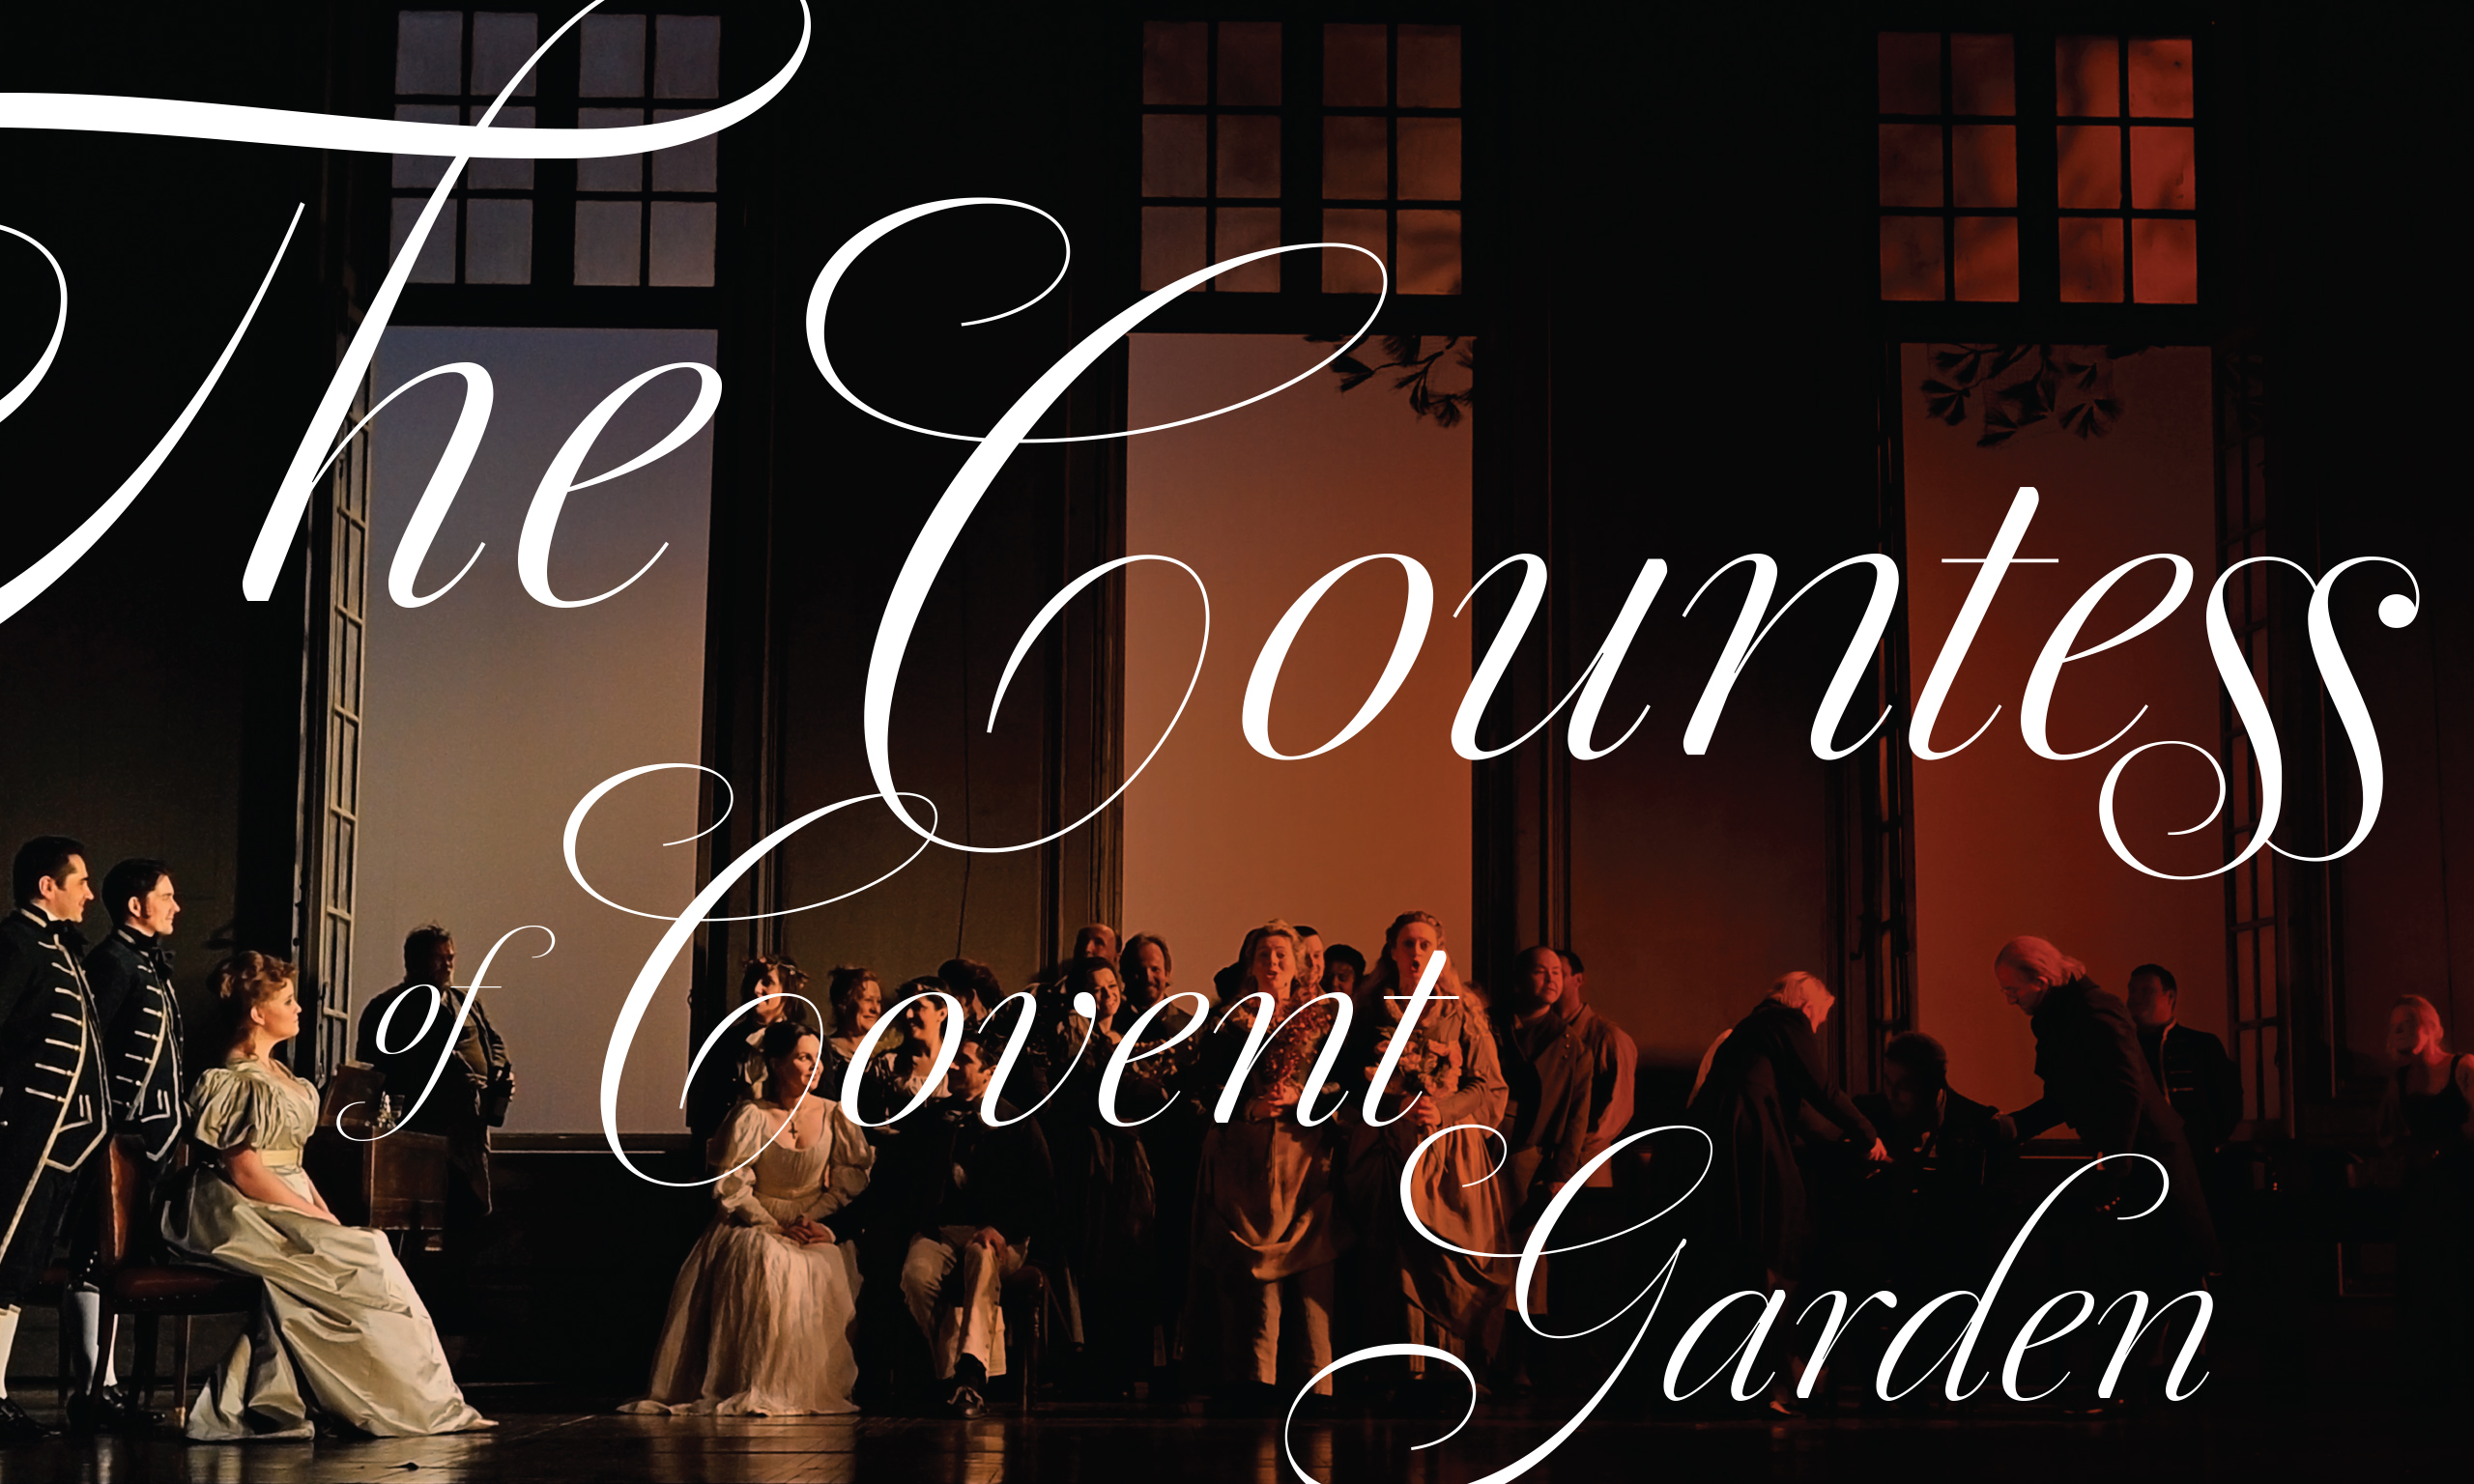 An opera scene on a stage overlayed with the title, "The Countess of Convent Garden"